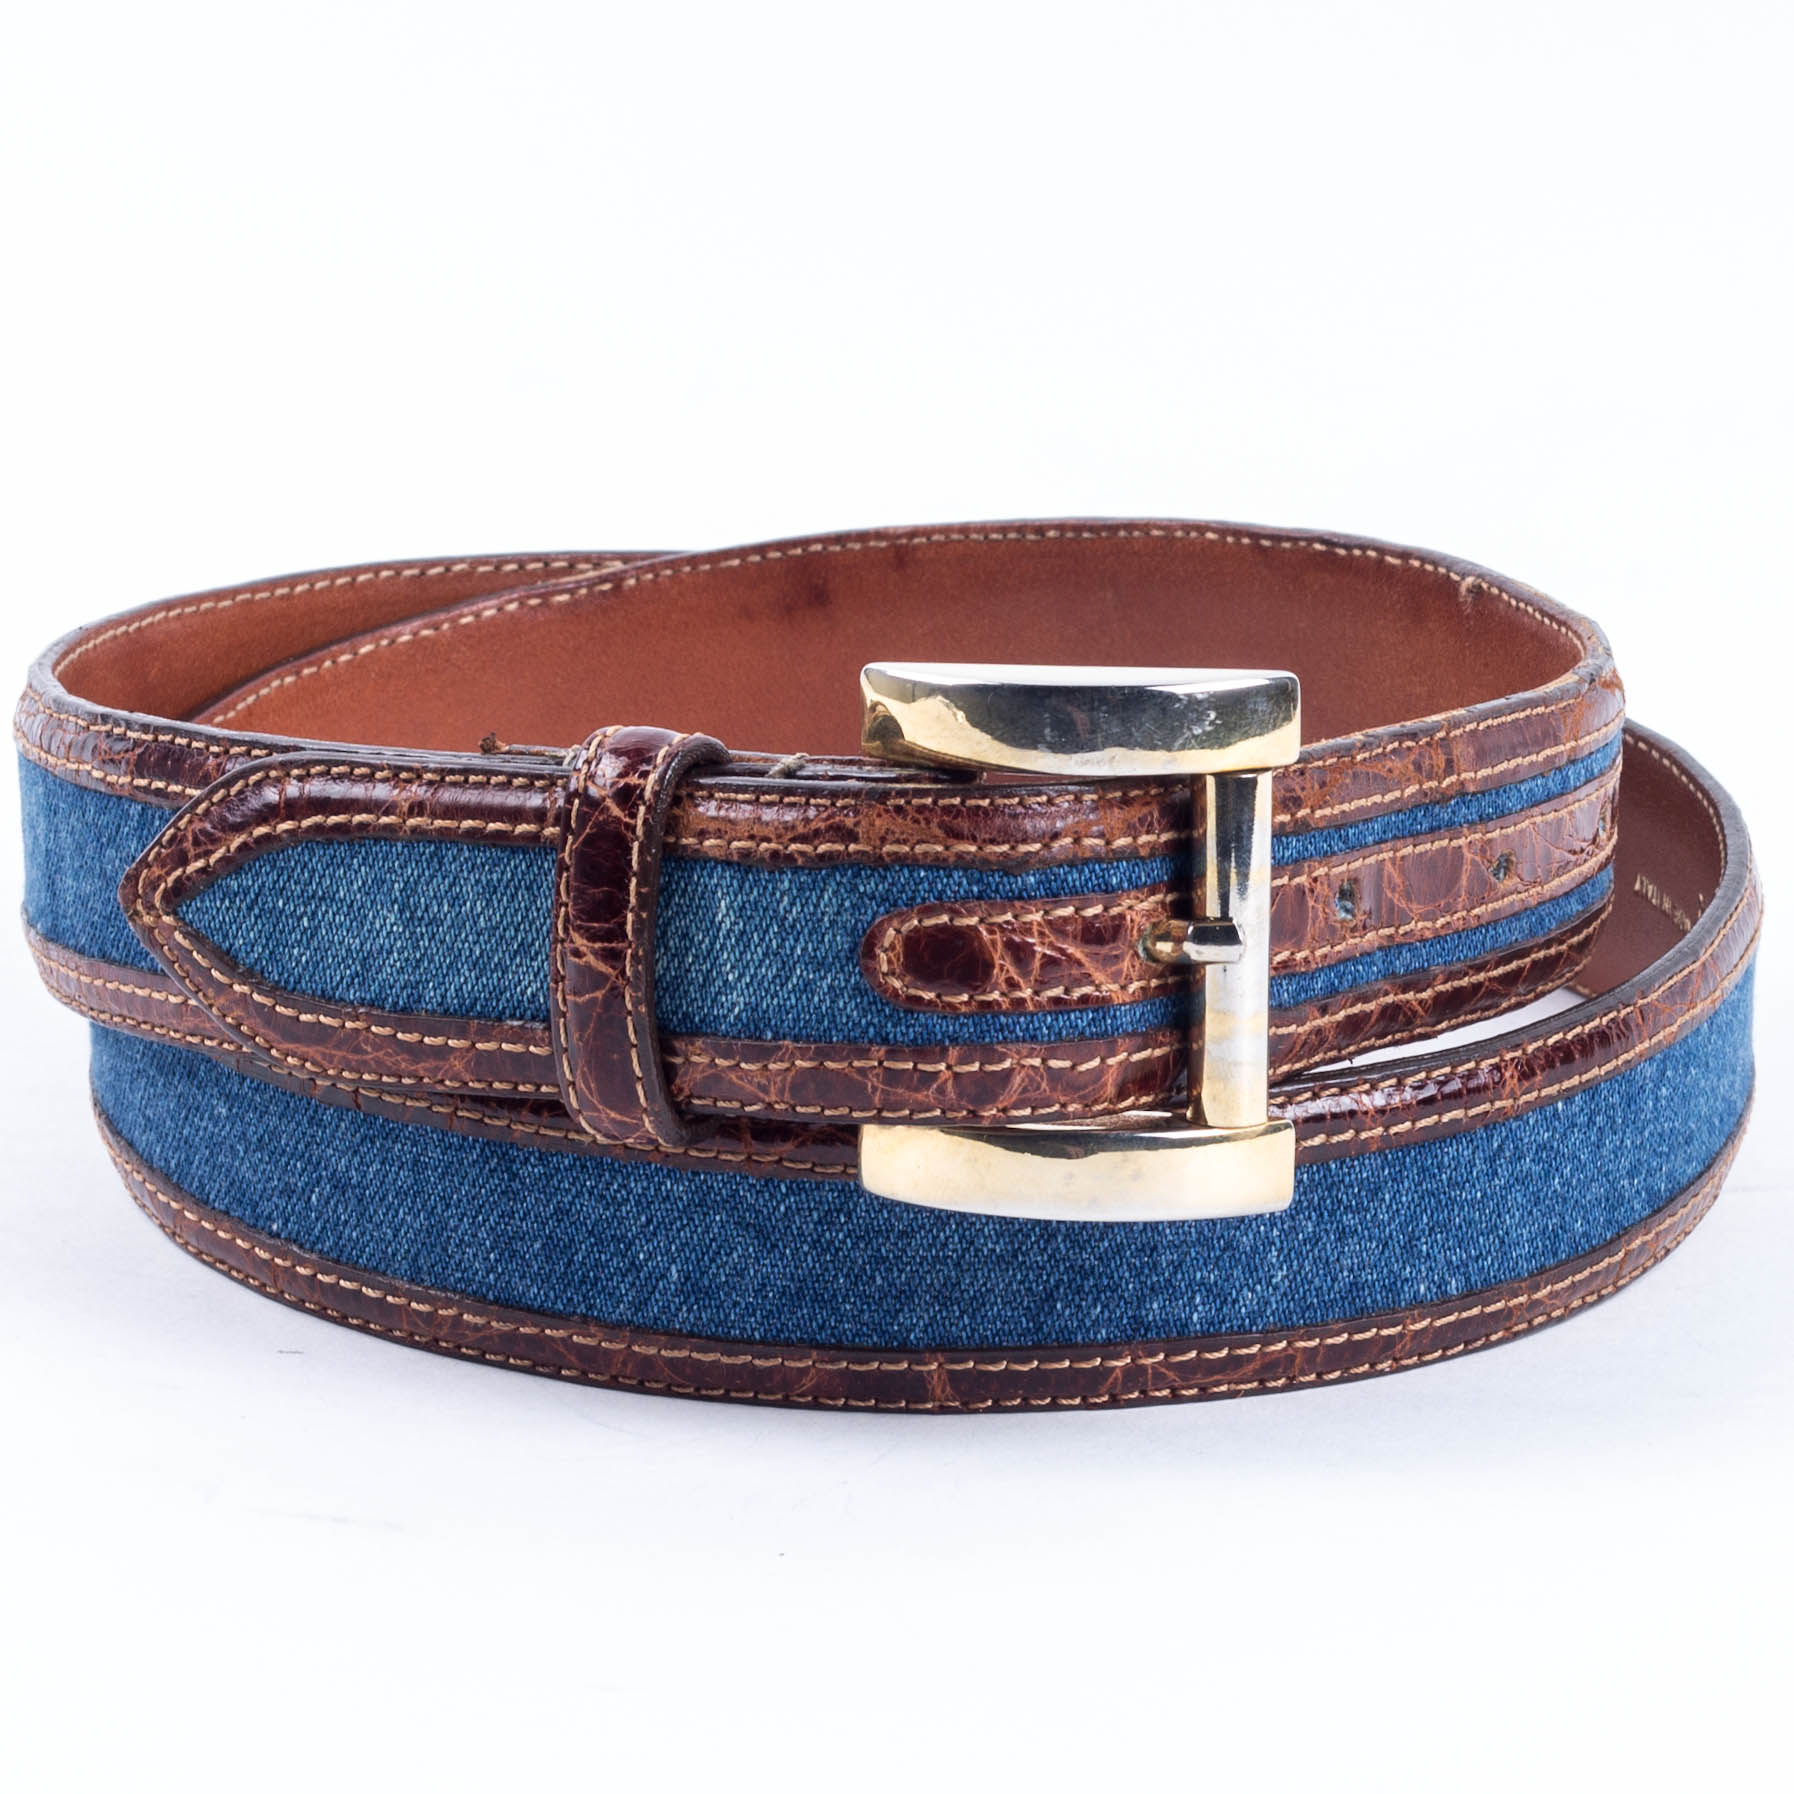 a belt with blue denim and gold buckle